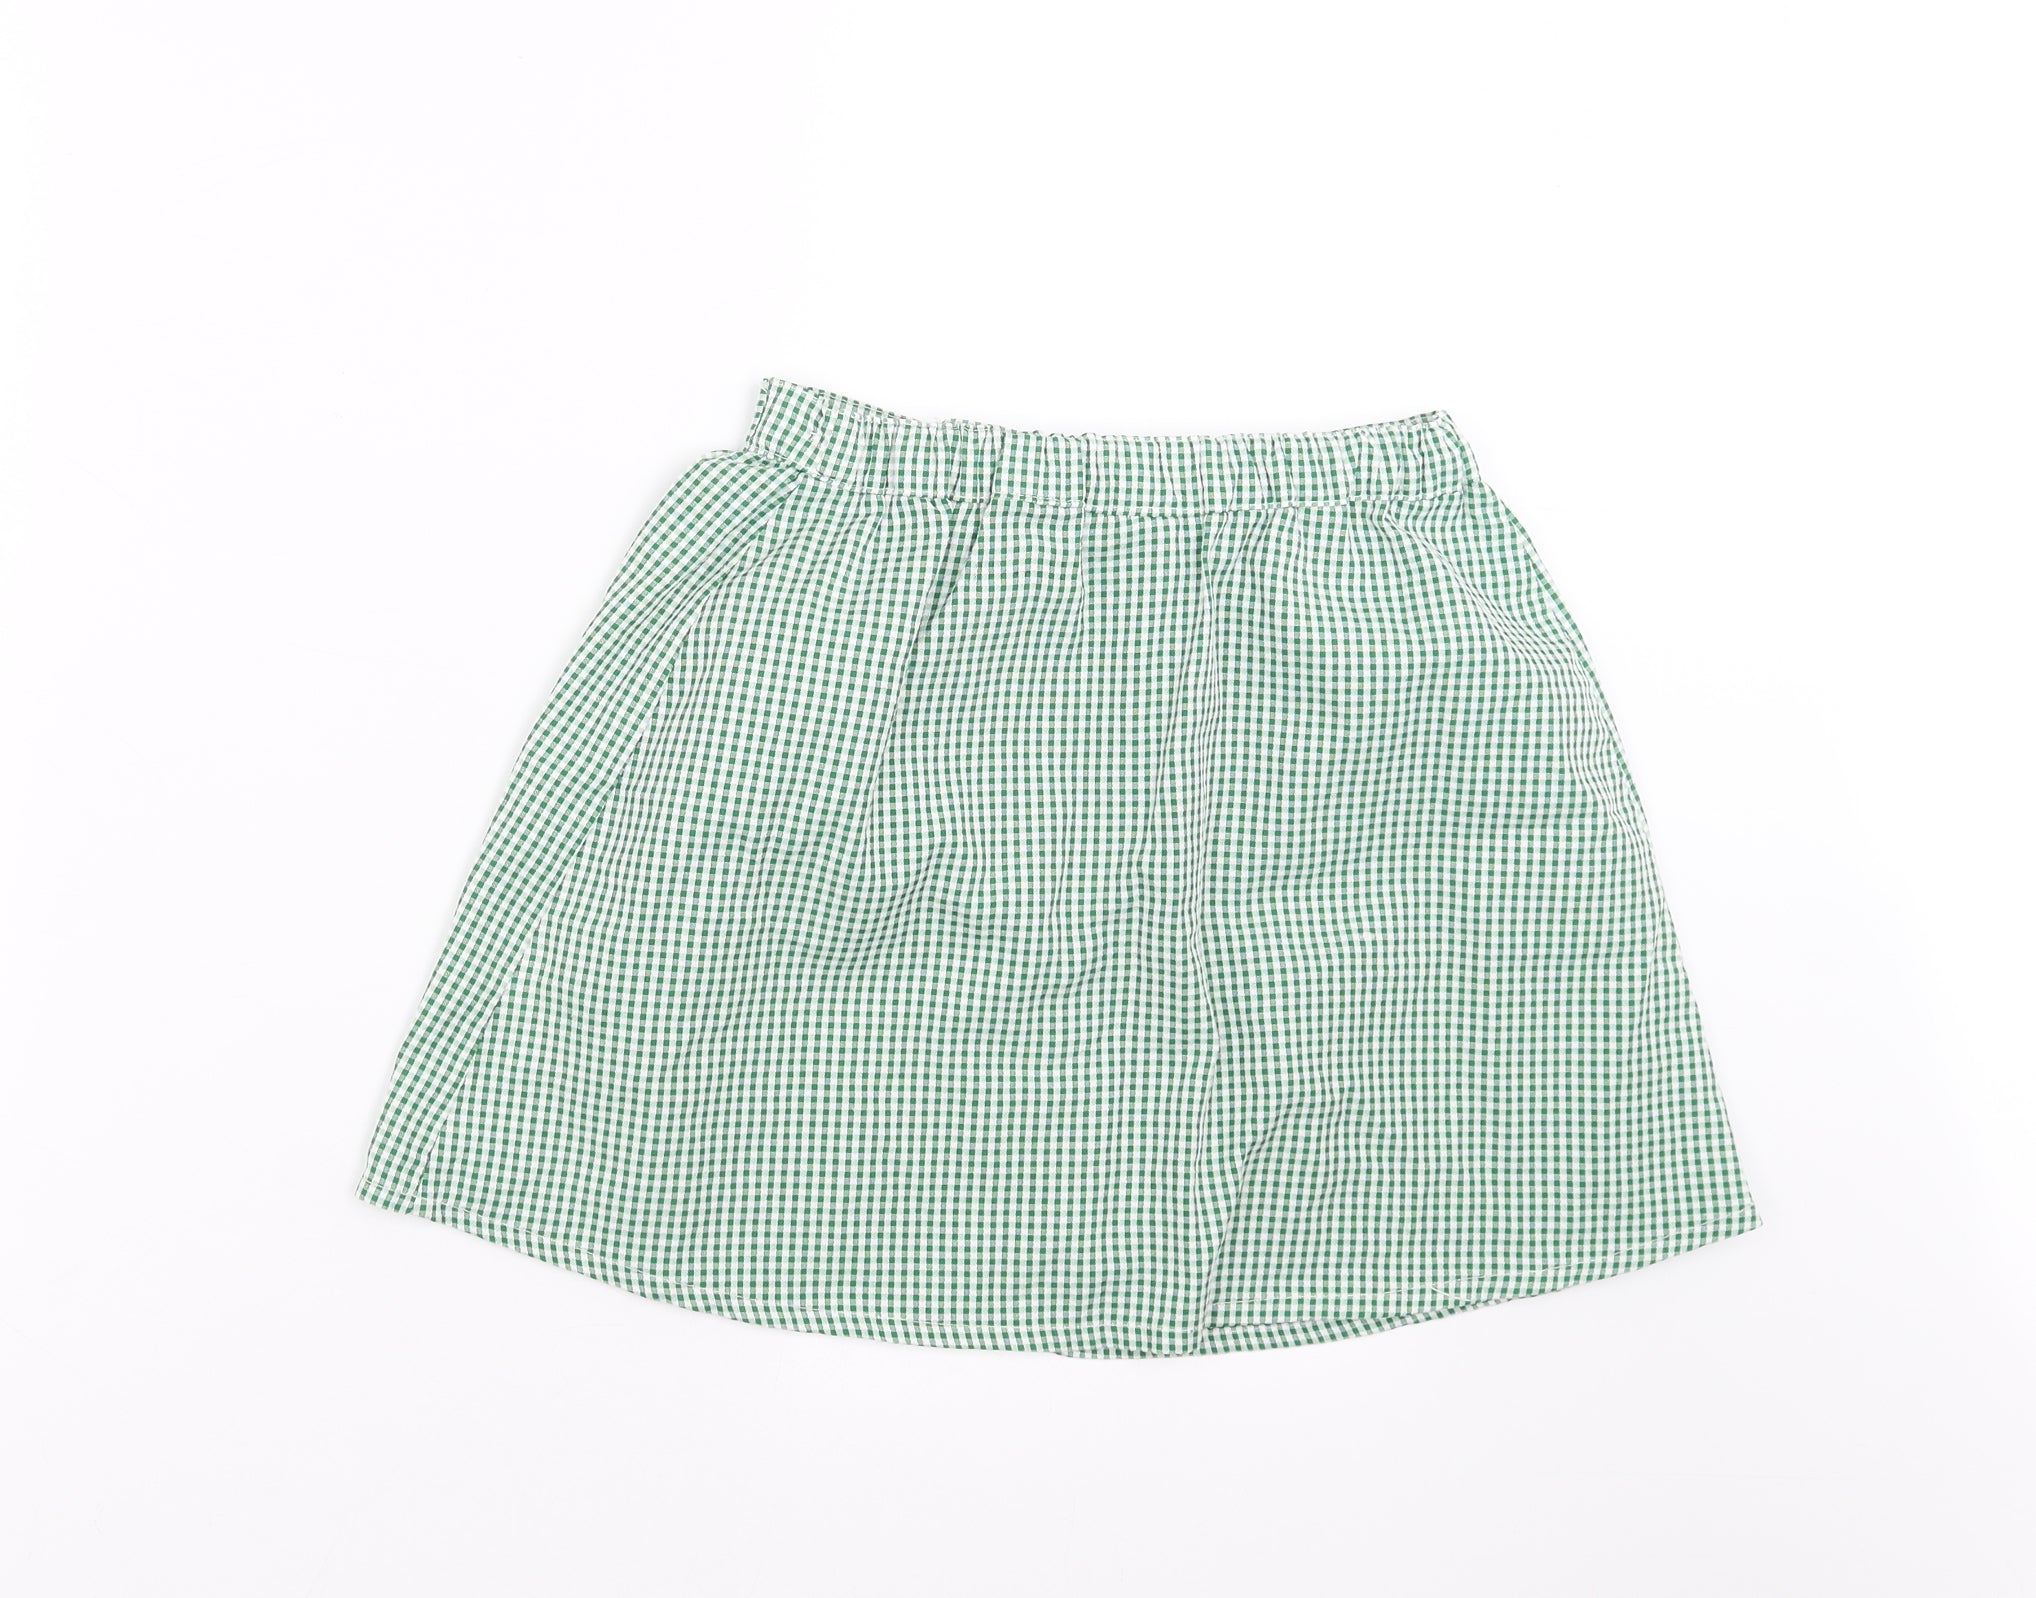 Buy Superdry Green Check Mini Skirt from the Next UK online shop